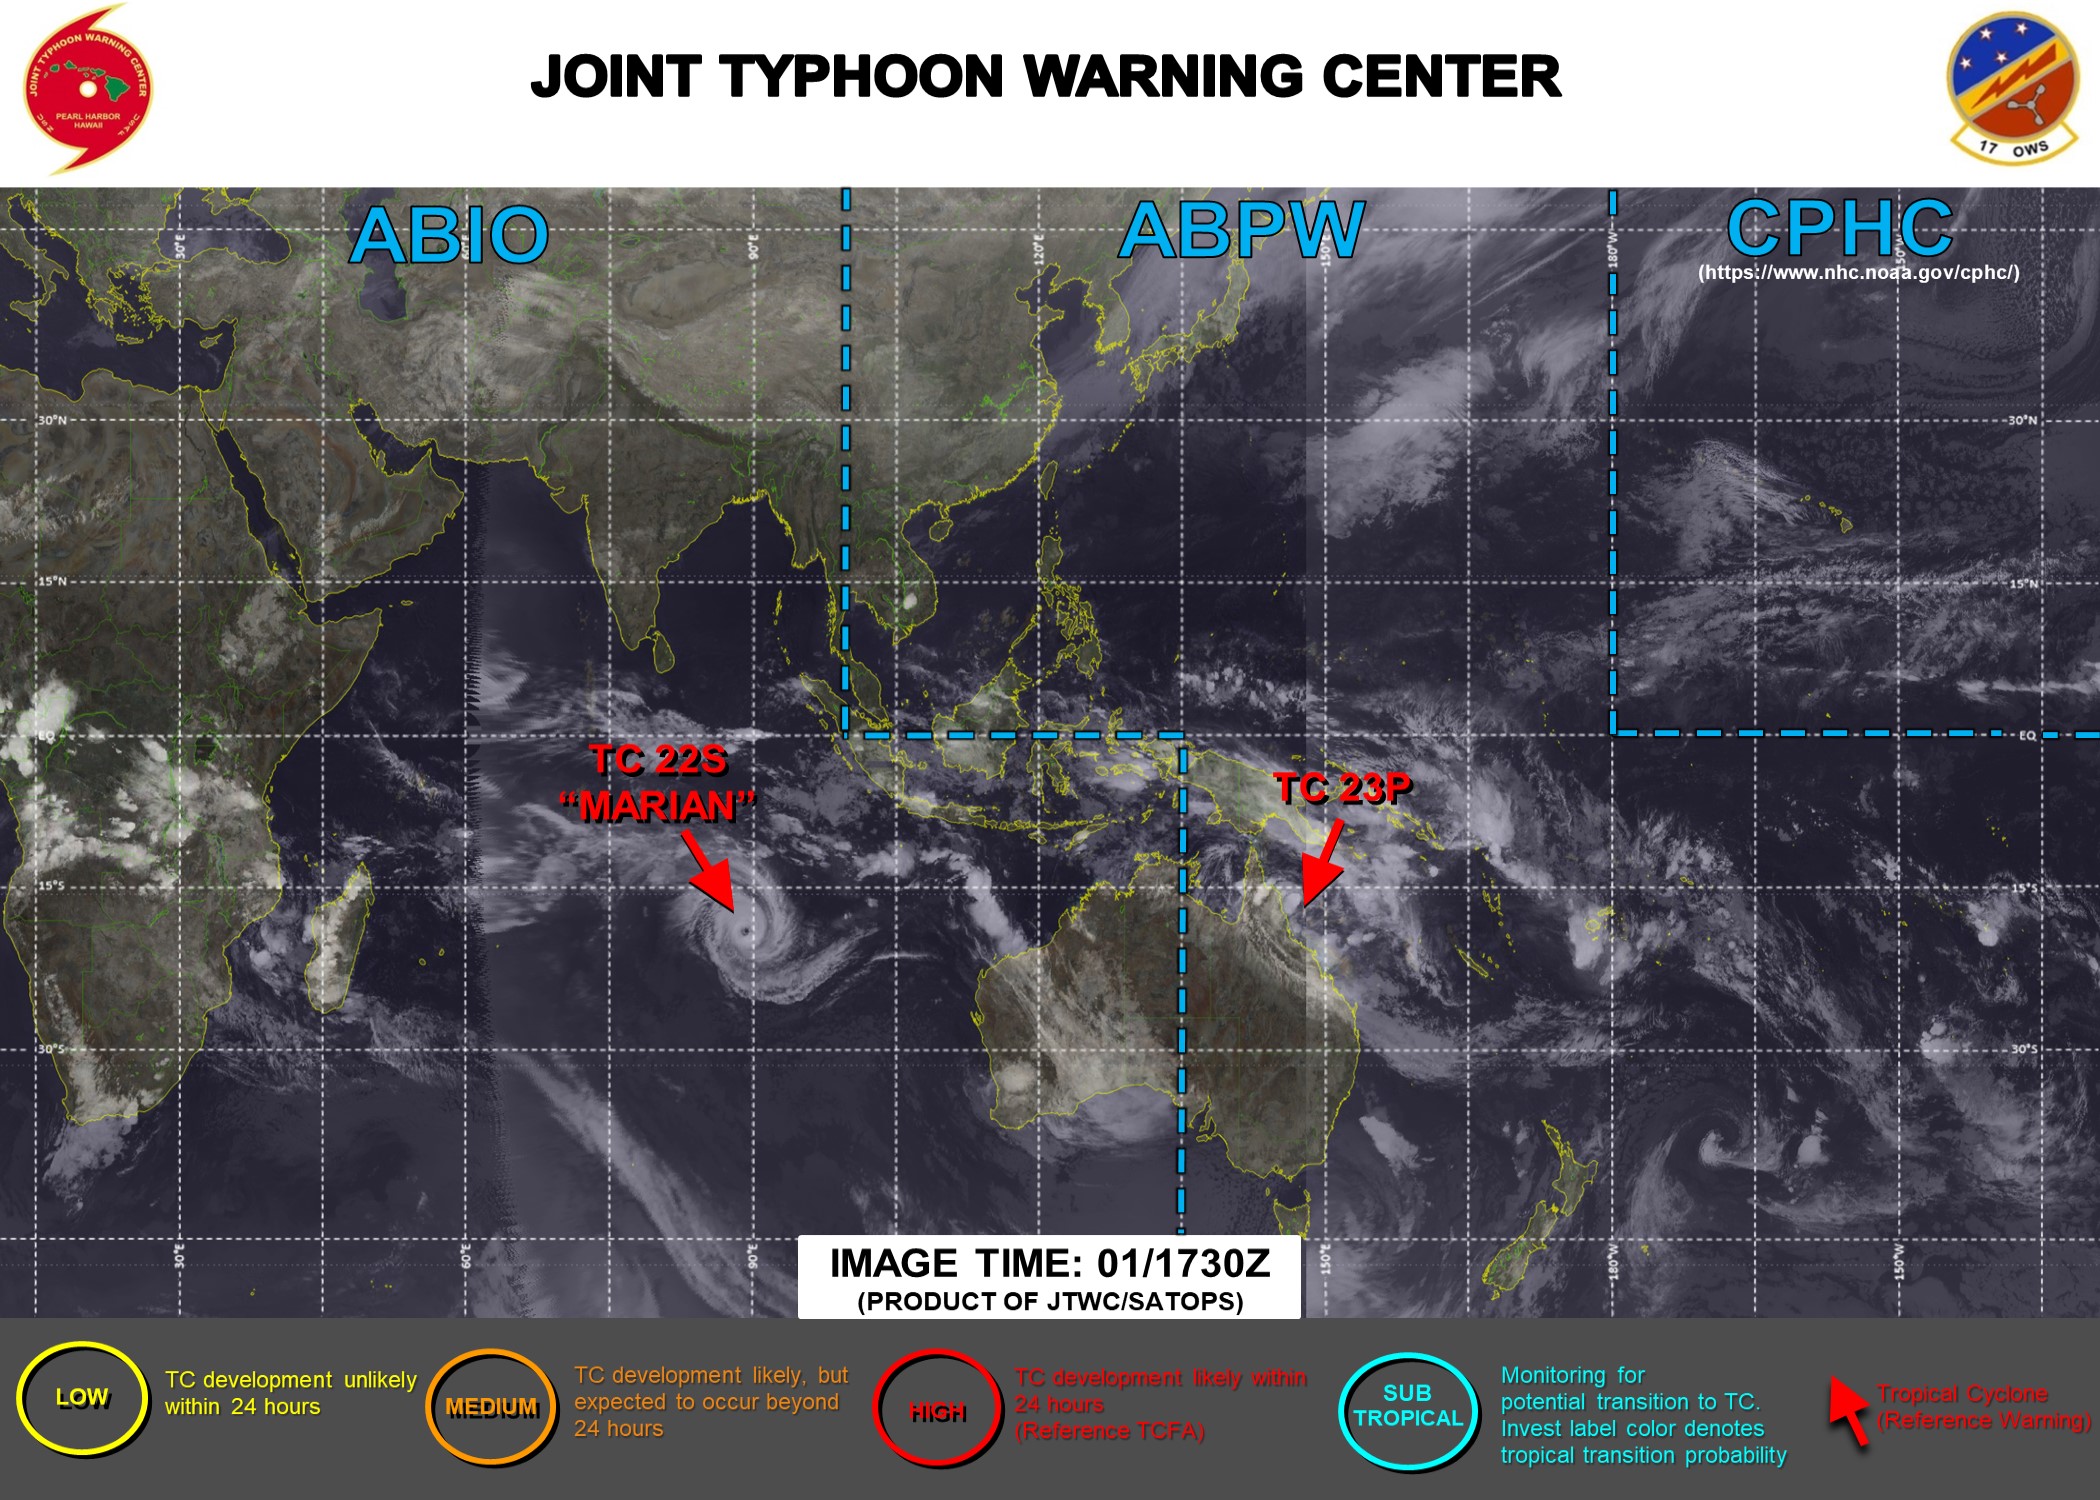 02/03UTC. JTWC IS ISSUING 3HOURLY WARNING ON TC 23P(NIRAN) AND 12HOURLY WARNINGS ON TC 22S(MARIAN). 3 HOURLY SATELLITE BULLETINS ARE ISSUED FOR BOTH SYSTEMS.